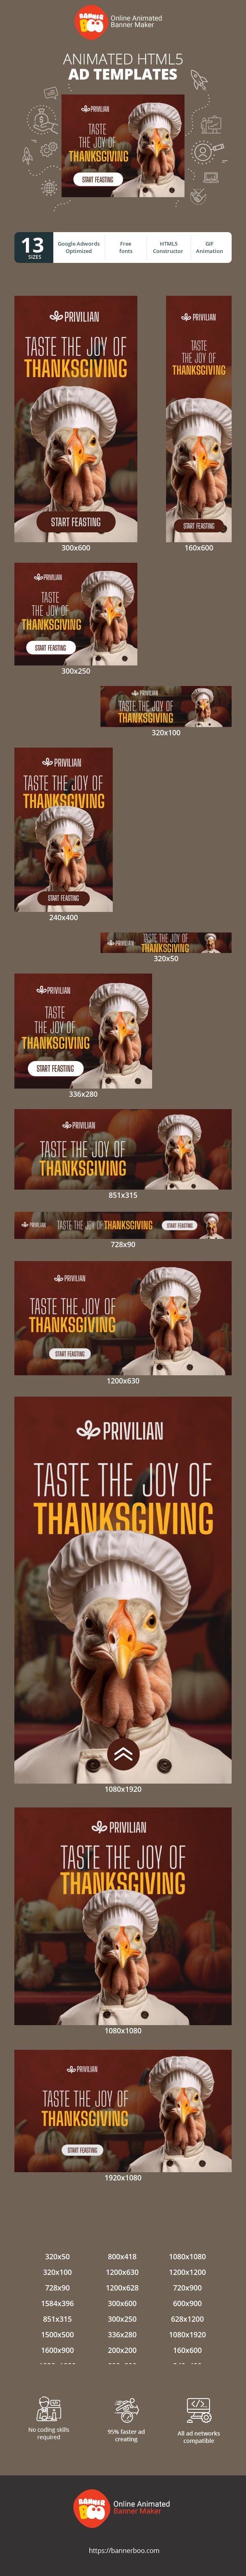 Banner ad template — Taste The Joy Of Thanksgiving — Thanksgiving Day